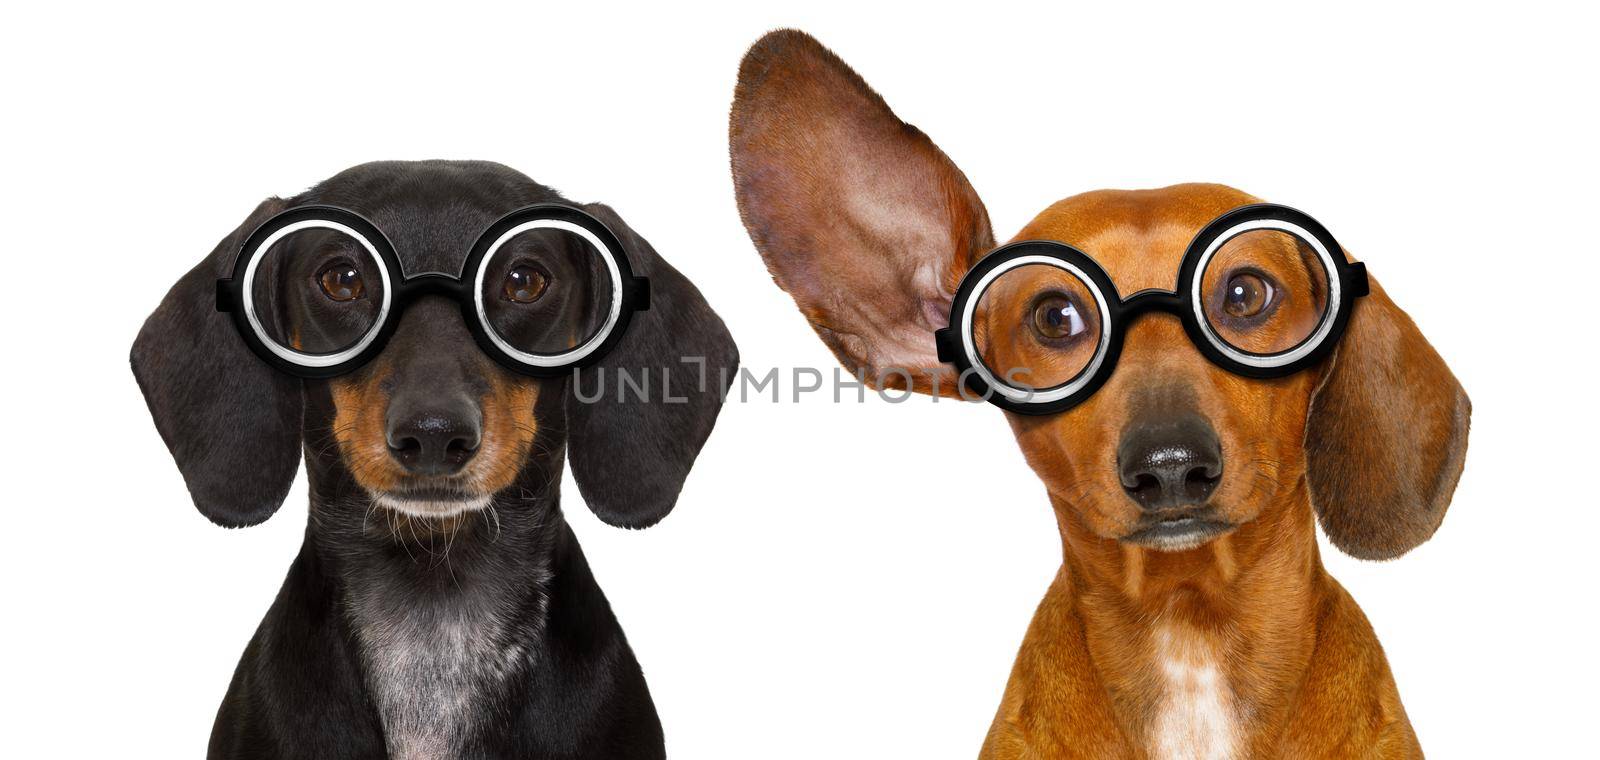 couple of dumb nerd silly dachshunds by Brosch